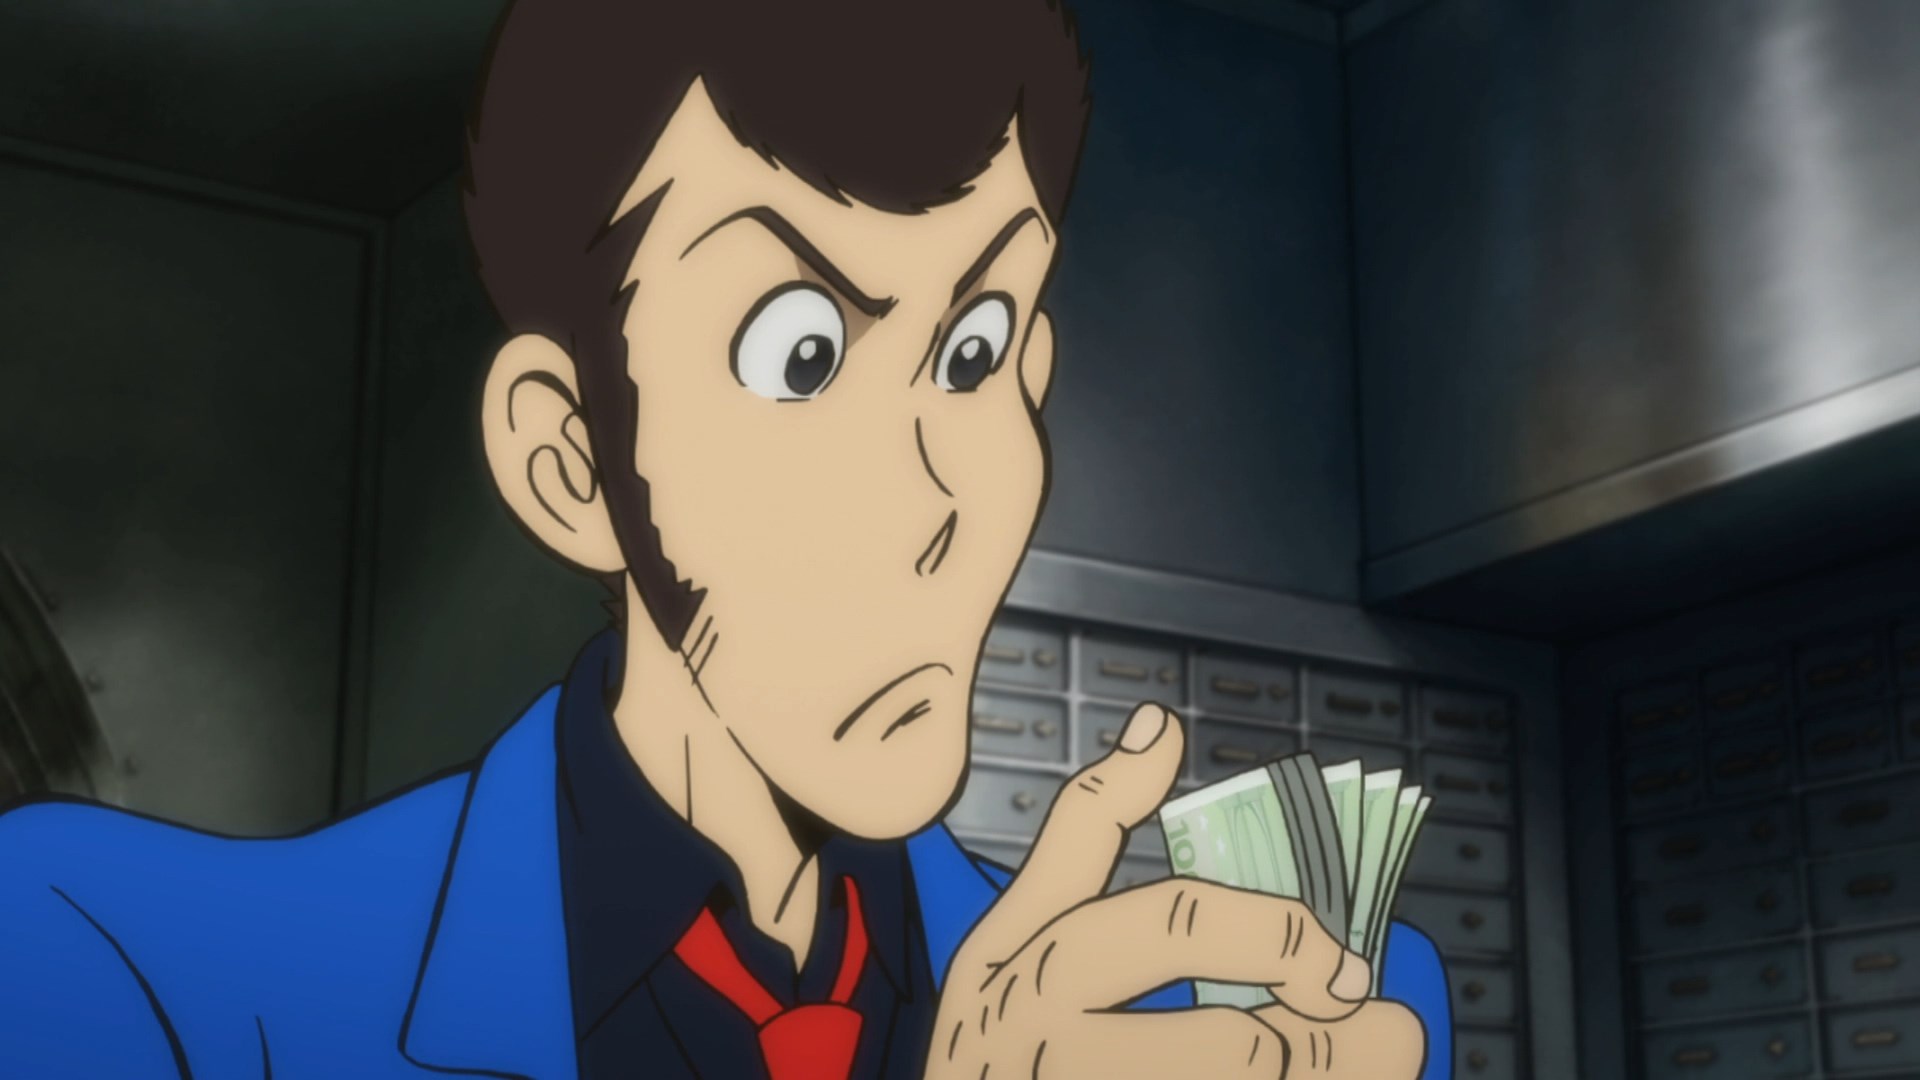 Lupin The Third Backgrounds, Compatible - PC, Mobile, Gadgets| 1920x1080 px